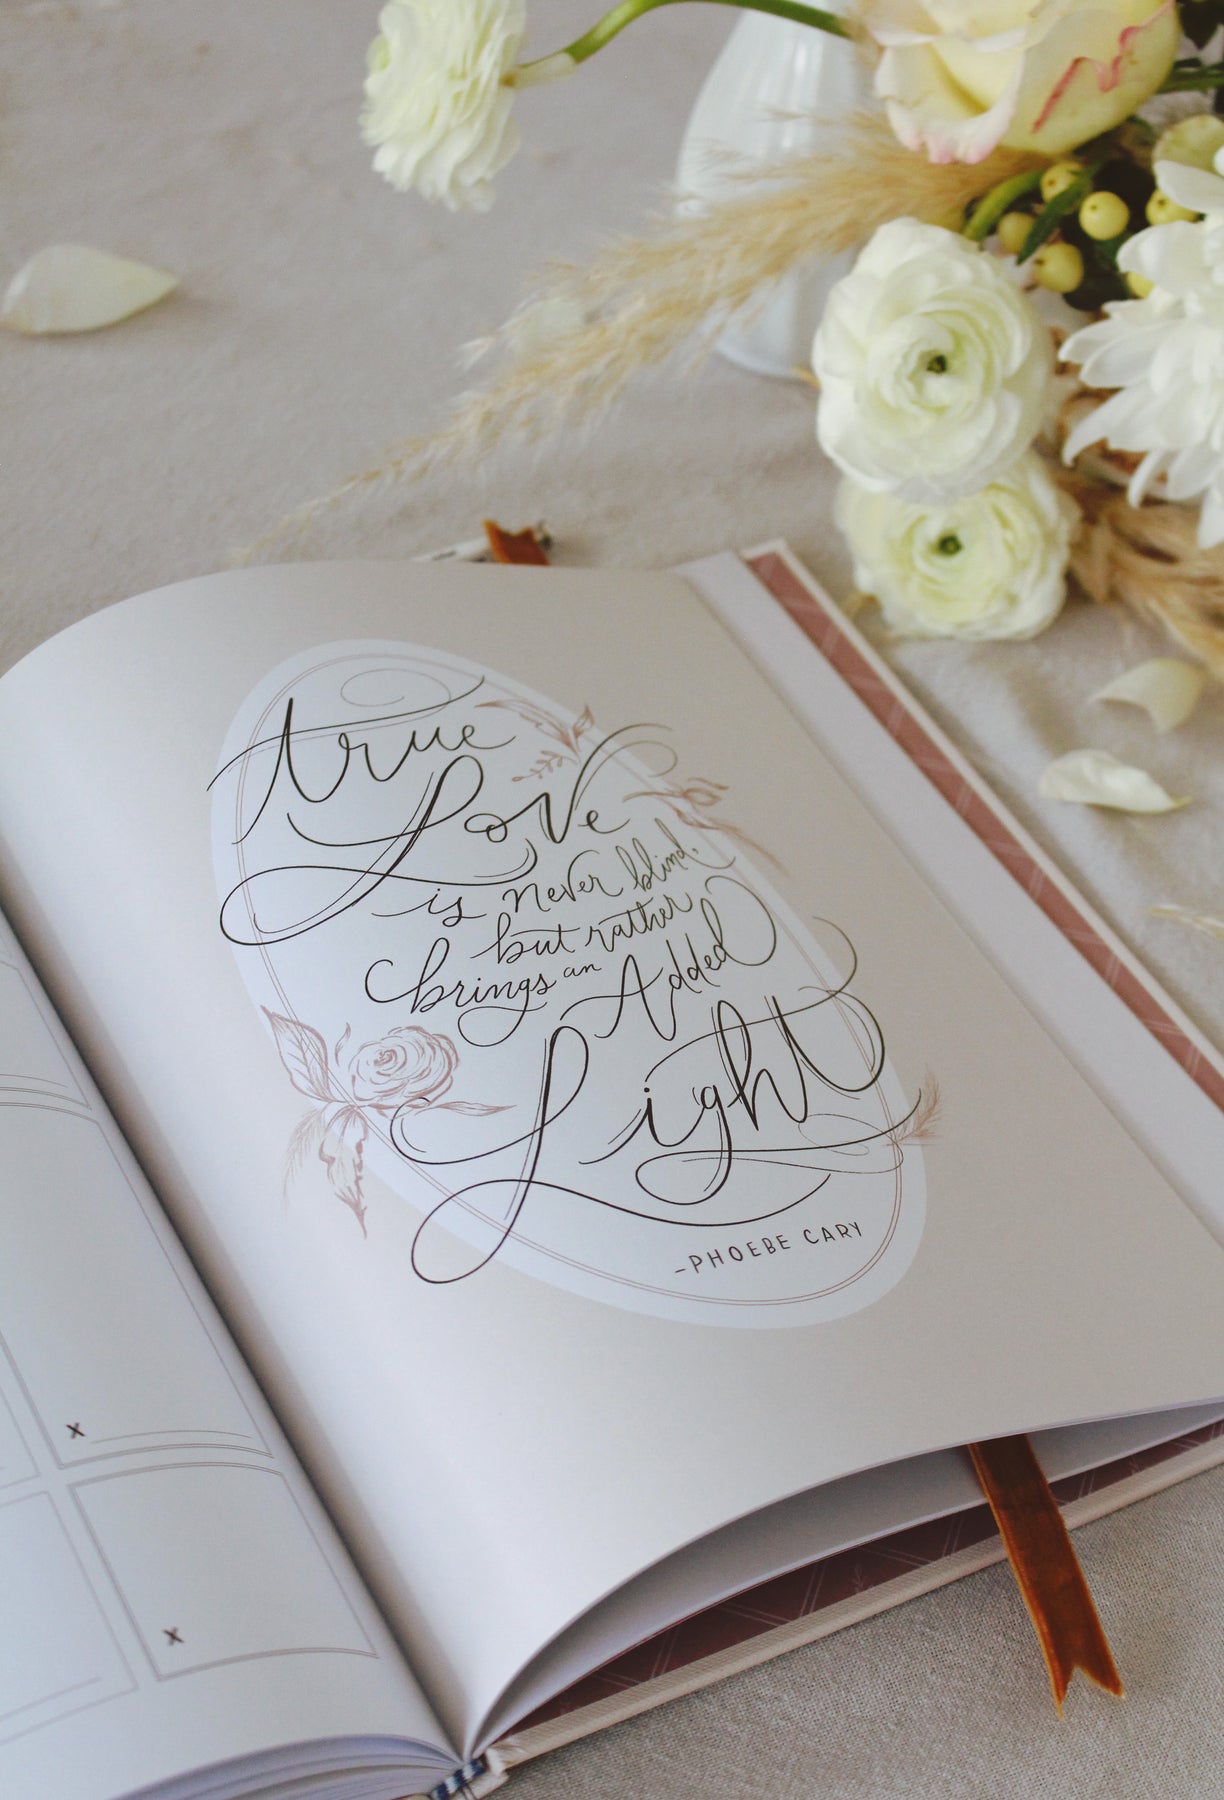 The Best Pens To Use In Your L&V Wedding Guestbook - Lily & Val Living